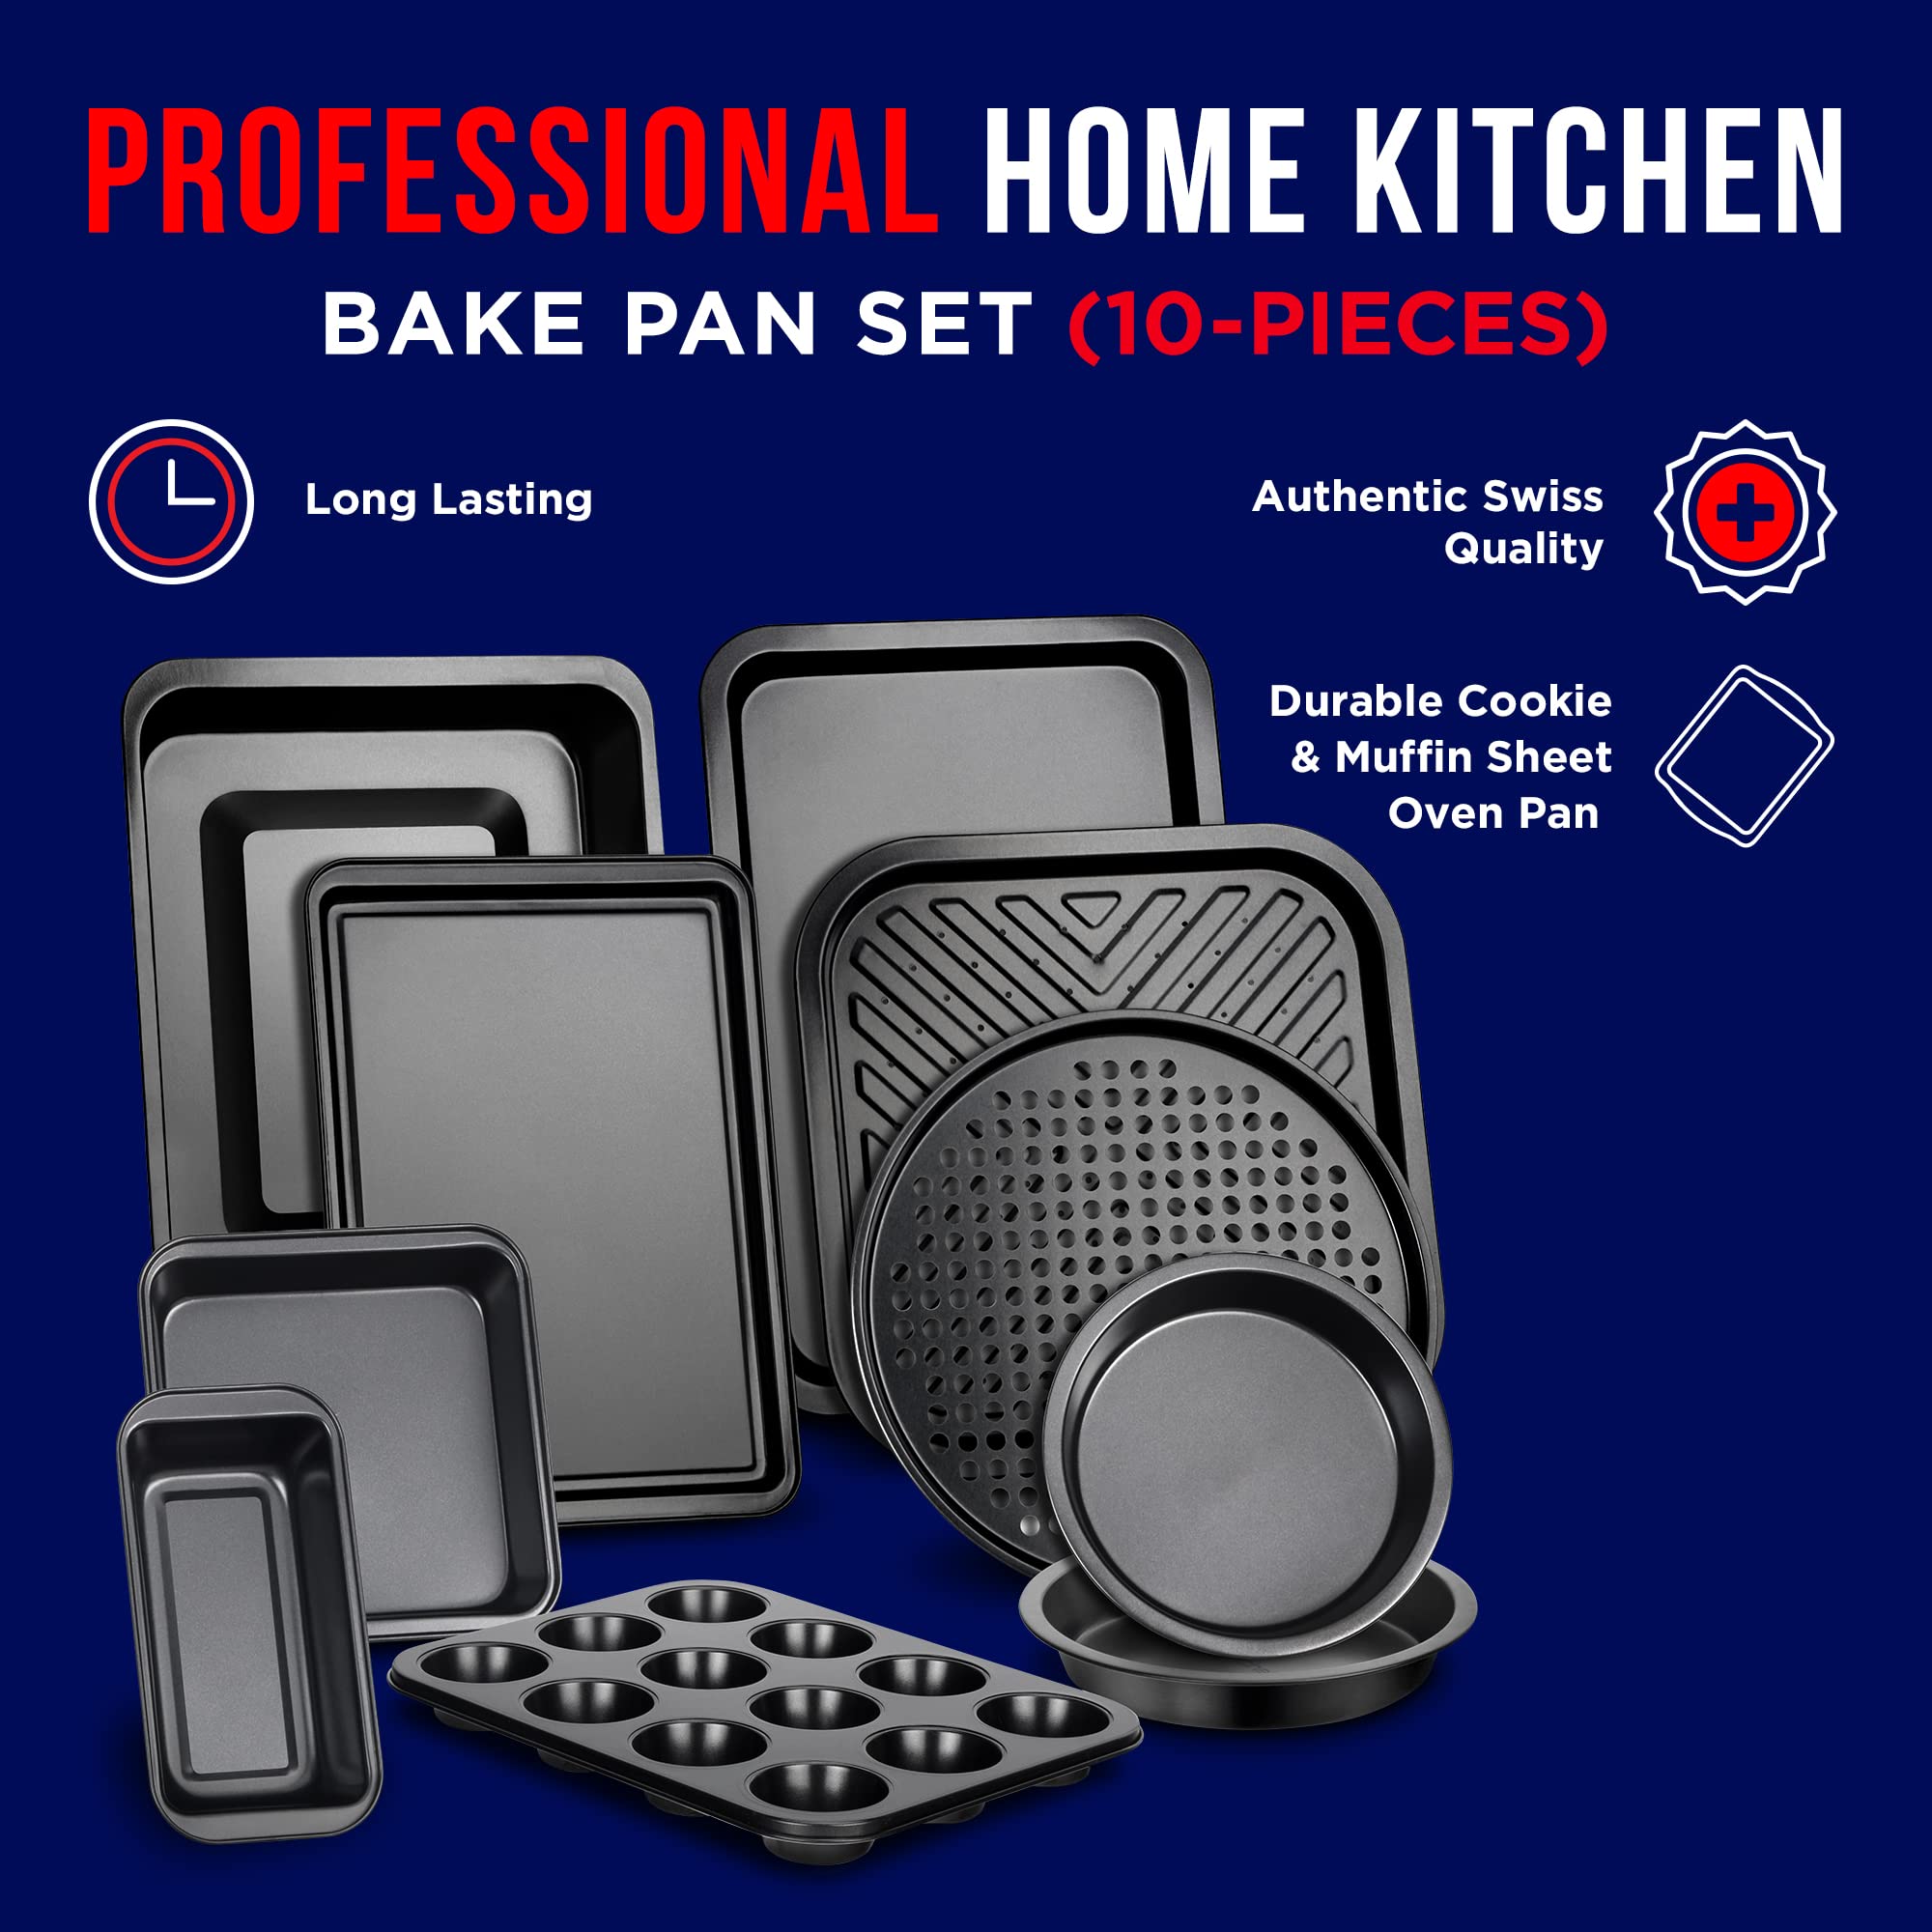 Baking Set – 10 Piece – Deluxe Non Stick Black Coating Inside and Outside – Carbon Steel Bakeware Set – PFOA PFOS and PTFE Free by Bakken